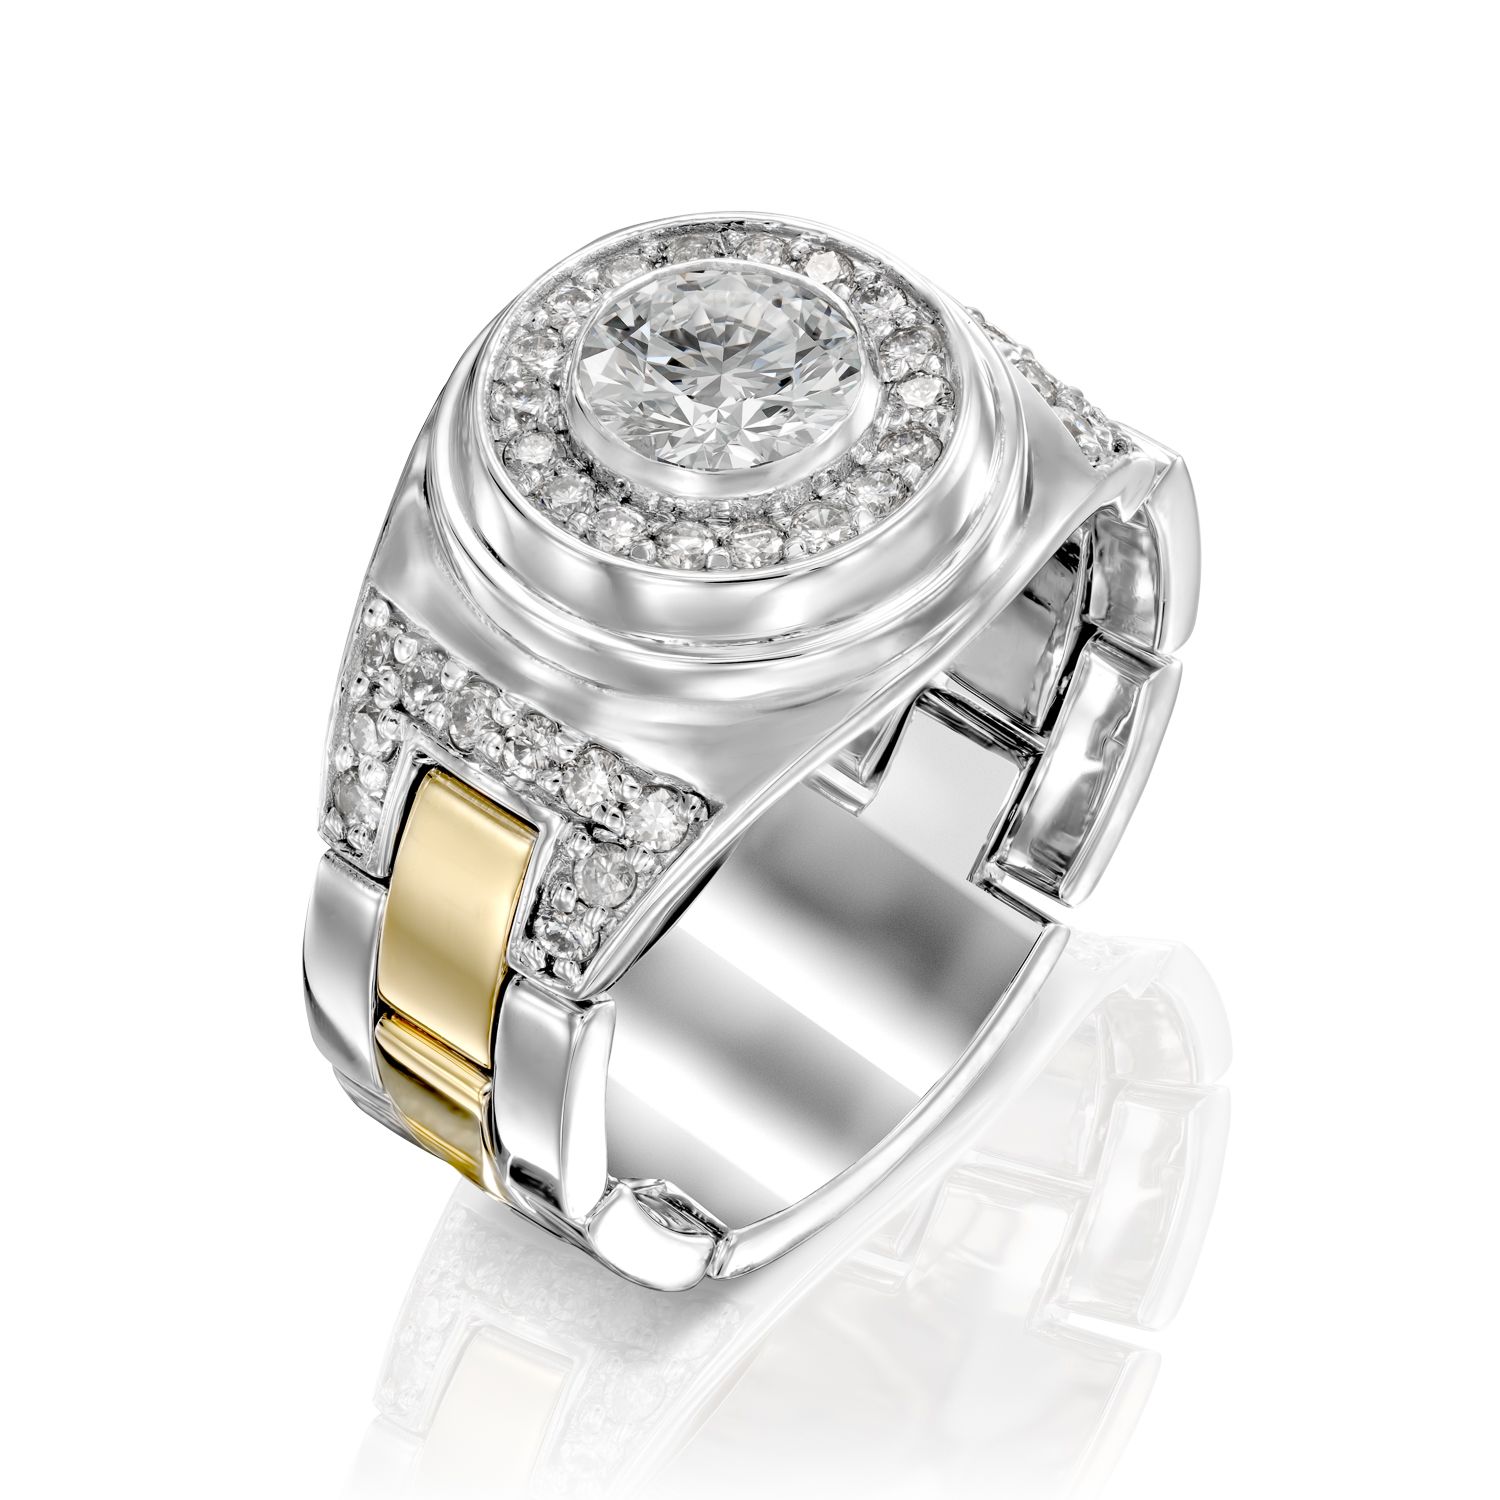 A luxurious two-tone Diamond ring model Michaelov featuring a central round-cut diamond, surrounded by a halo of smaller diamonds and with additional diamonds embellishing the band, set in a combination of white and yellow gold.